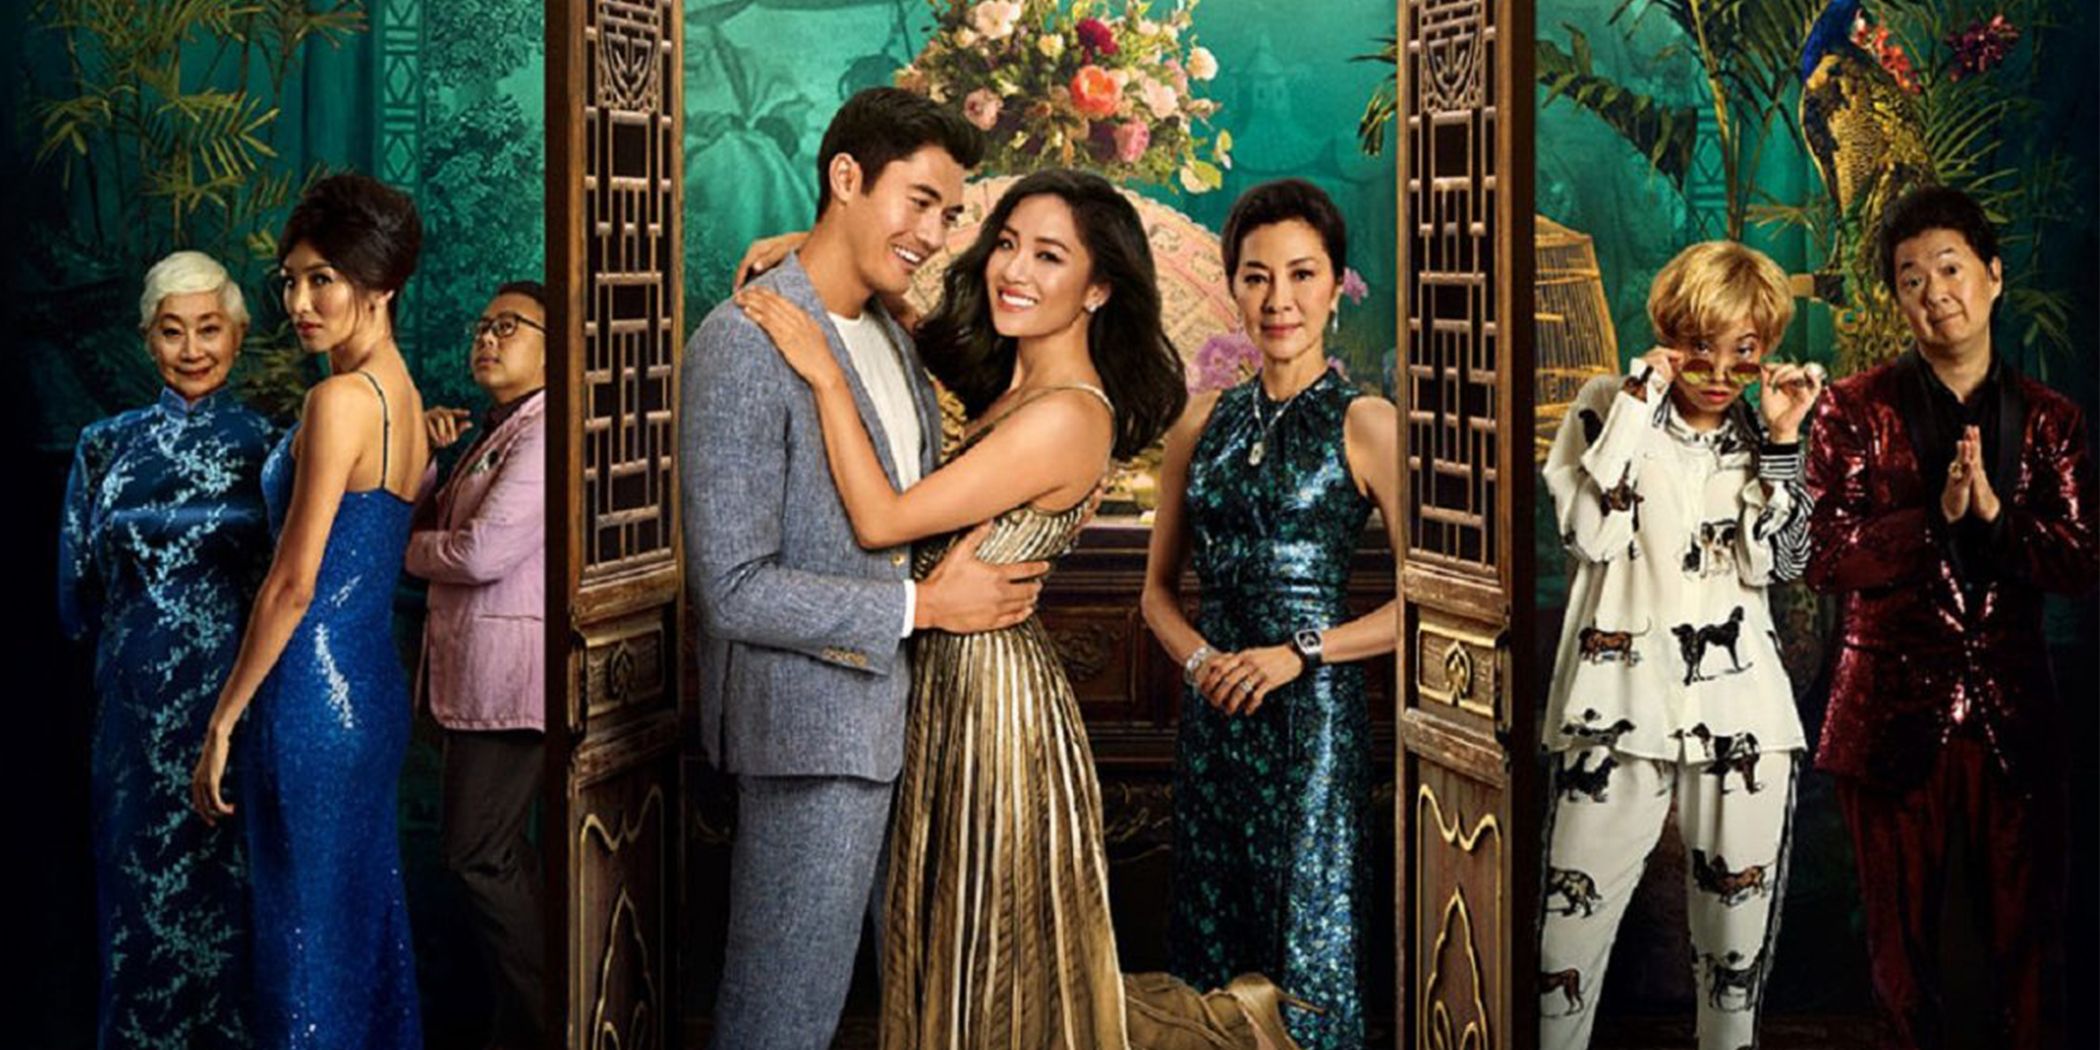 A promotional banner for Crazy Rich Asians featuring the main cast